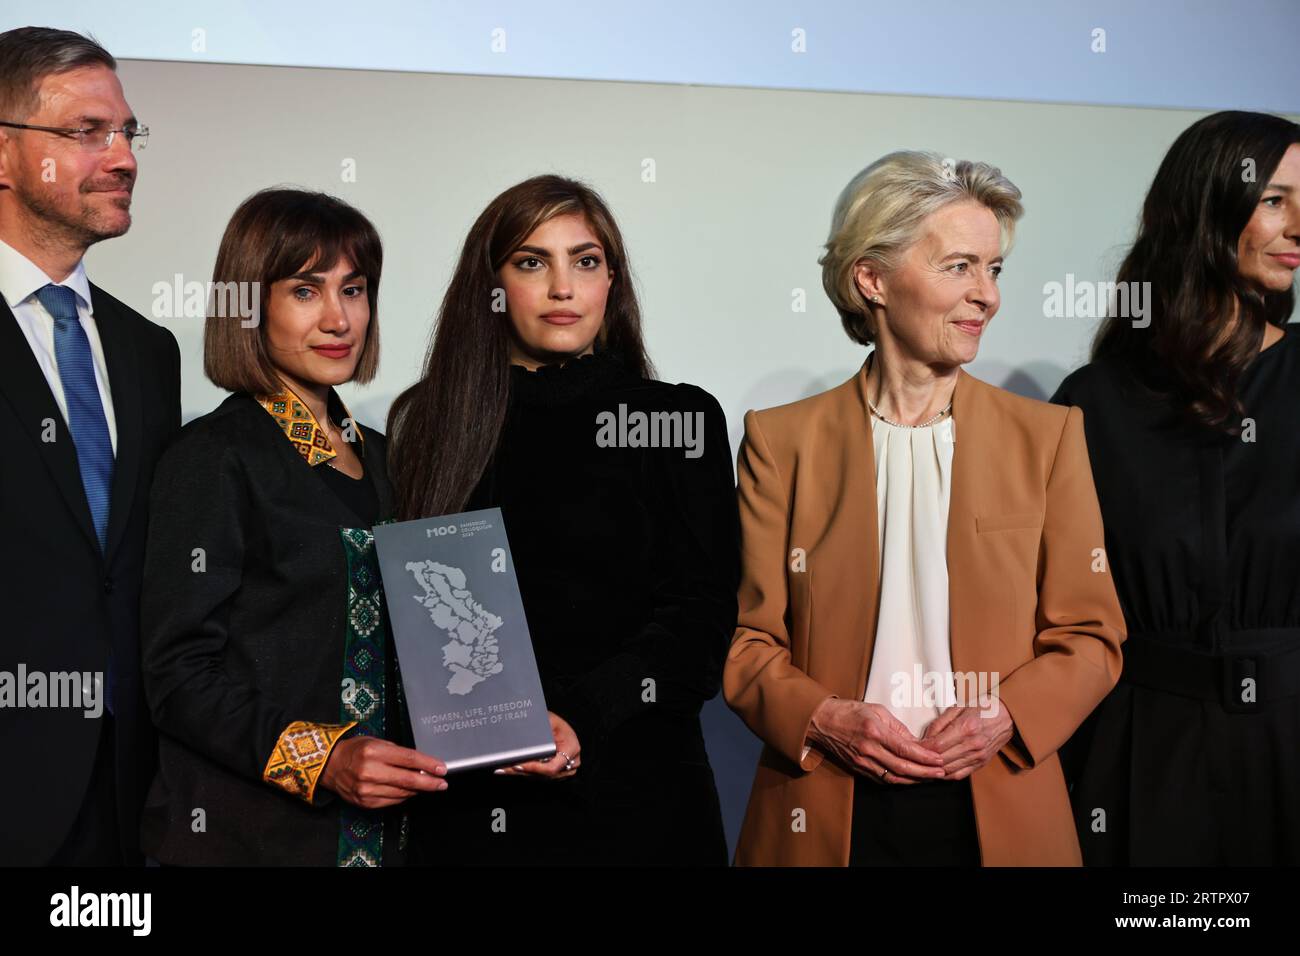 Potsdam, Germany, September 14, 2023, (l-r) Mike Schubert, Mersedeh Shahinkar, Shima Babaei, Ursula von der Leyen, on stage from the M100 Media Award to the Iranian “Women, Life, Freedom” movement in the Orangerie in Park Sanssouci. Sven Struck/Alamy Live News Stock Photo